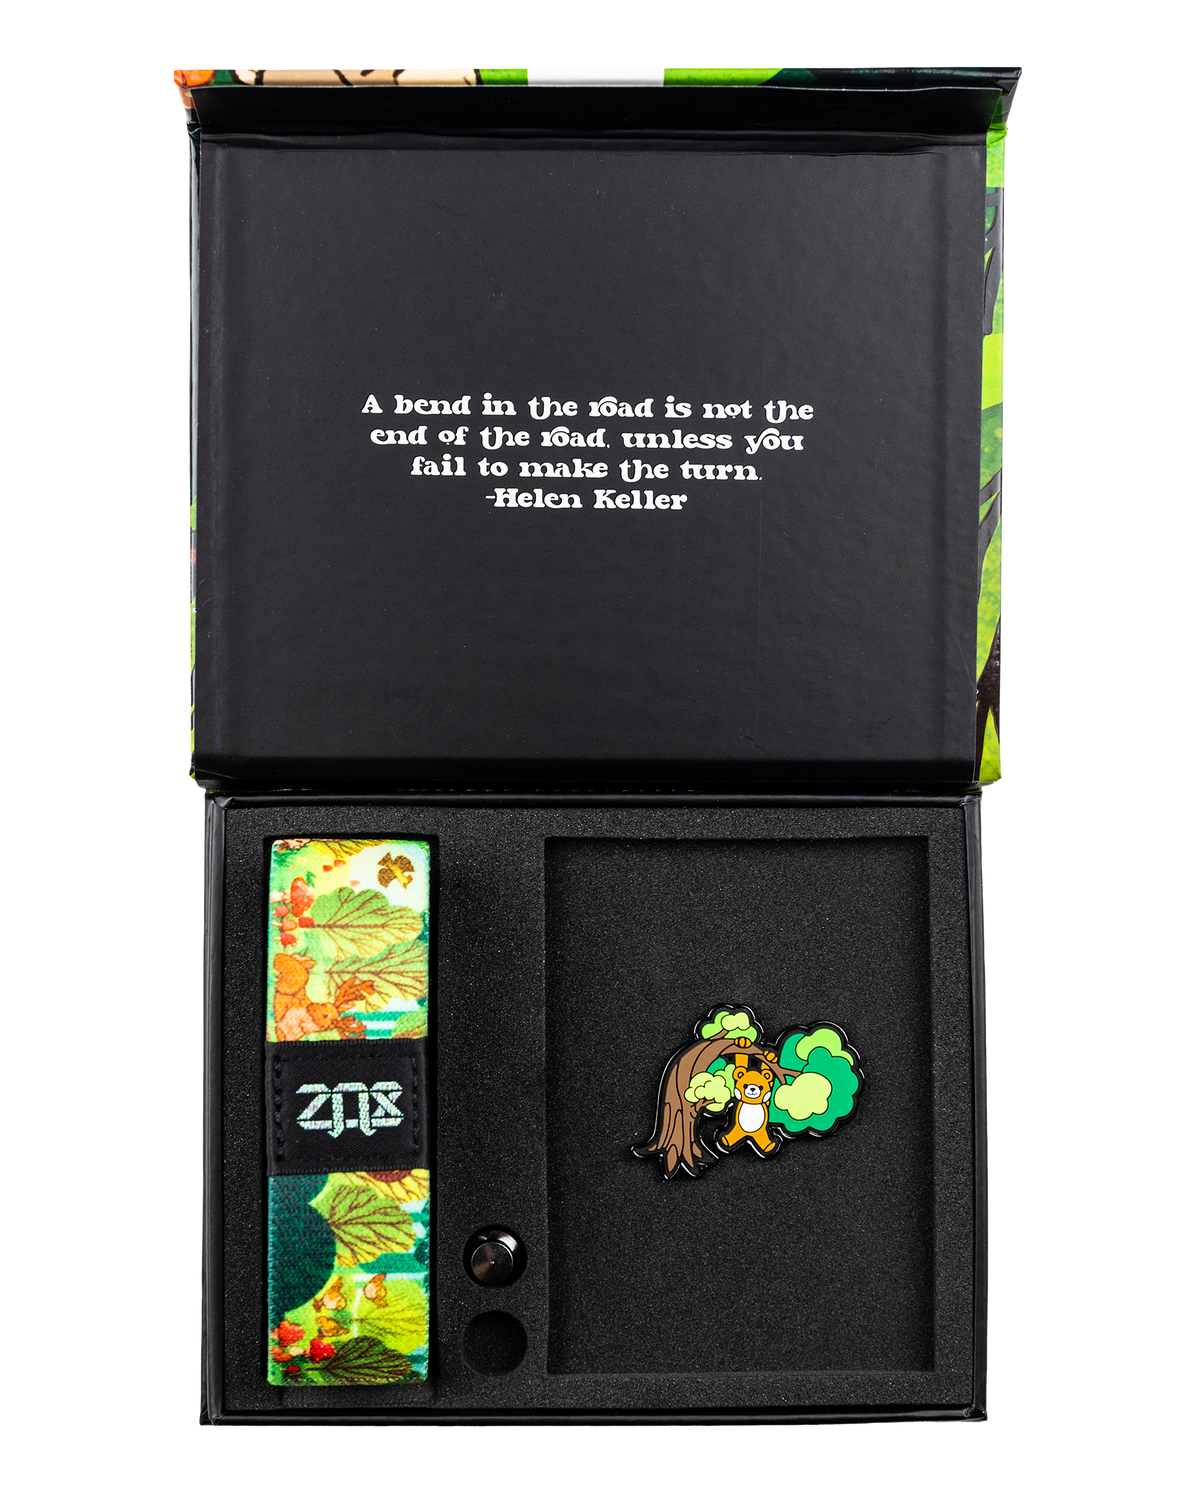 This is a reversible strap. The outside design is a cartoon scene of a bear climbing a tree in the jungle. It comes with a matching lapel pin of the bear hanging on a limb, and a collector's box. 